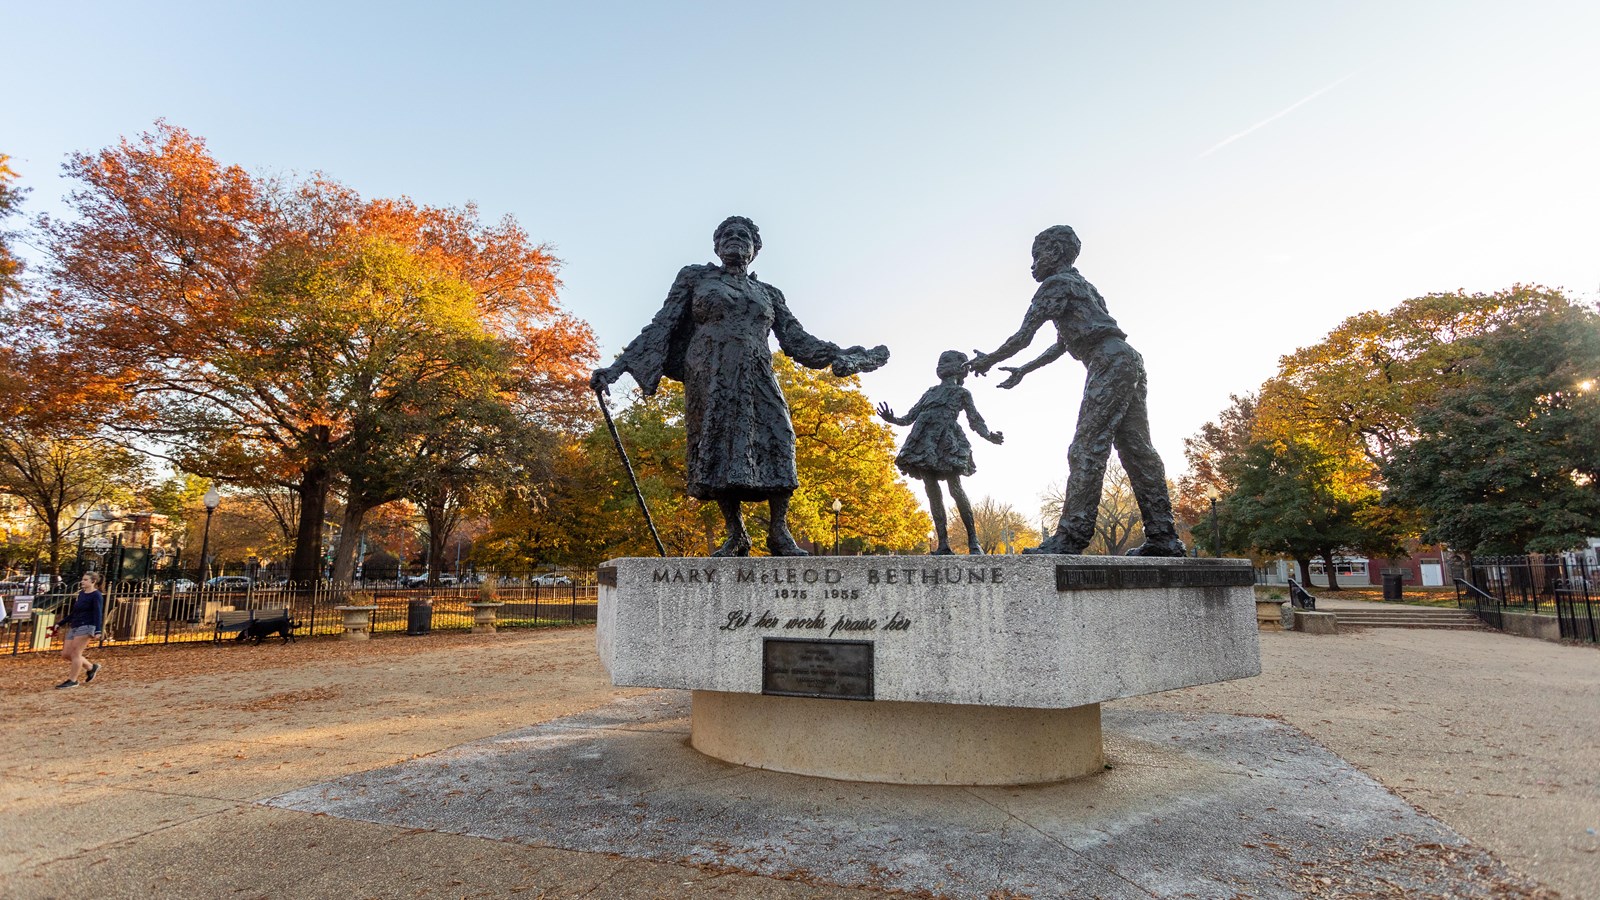 A bronze statue of Mary McLeod handing a paper that represents her legacy to two young children. 